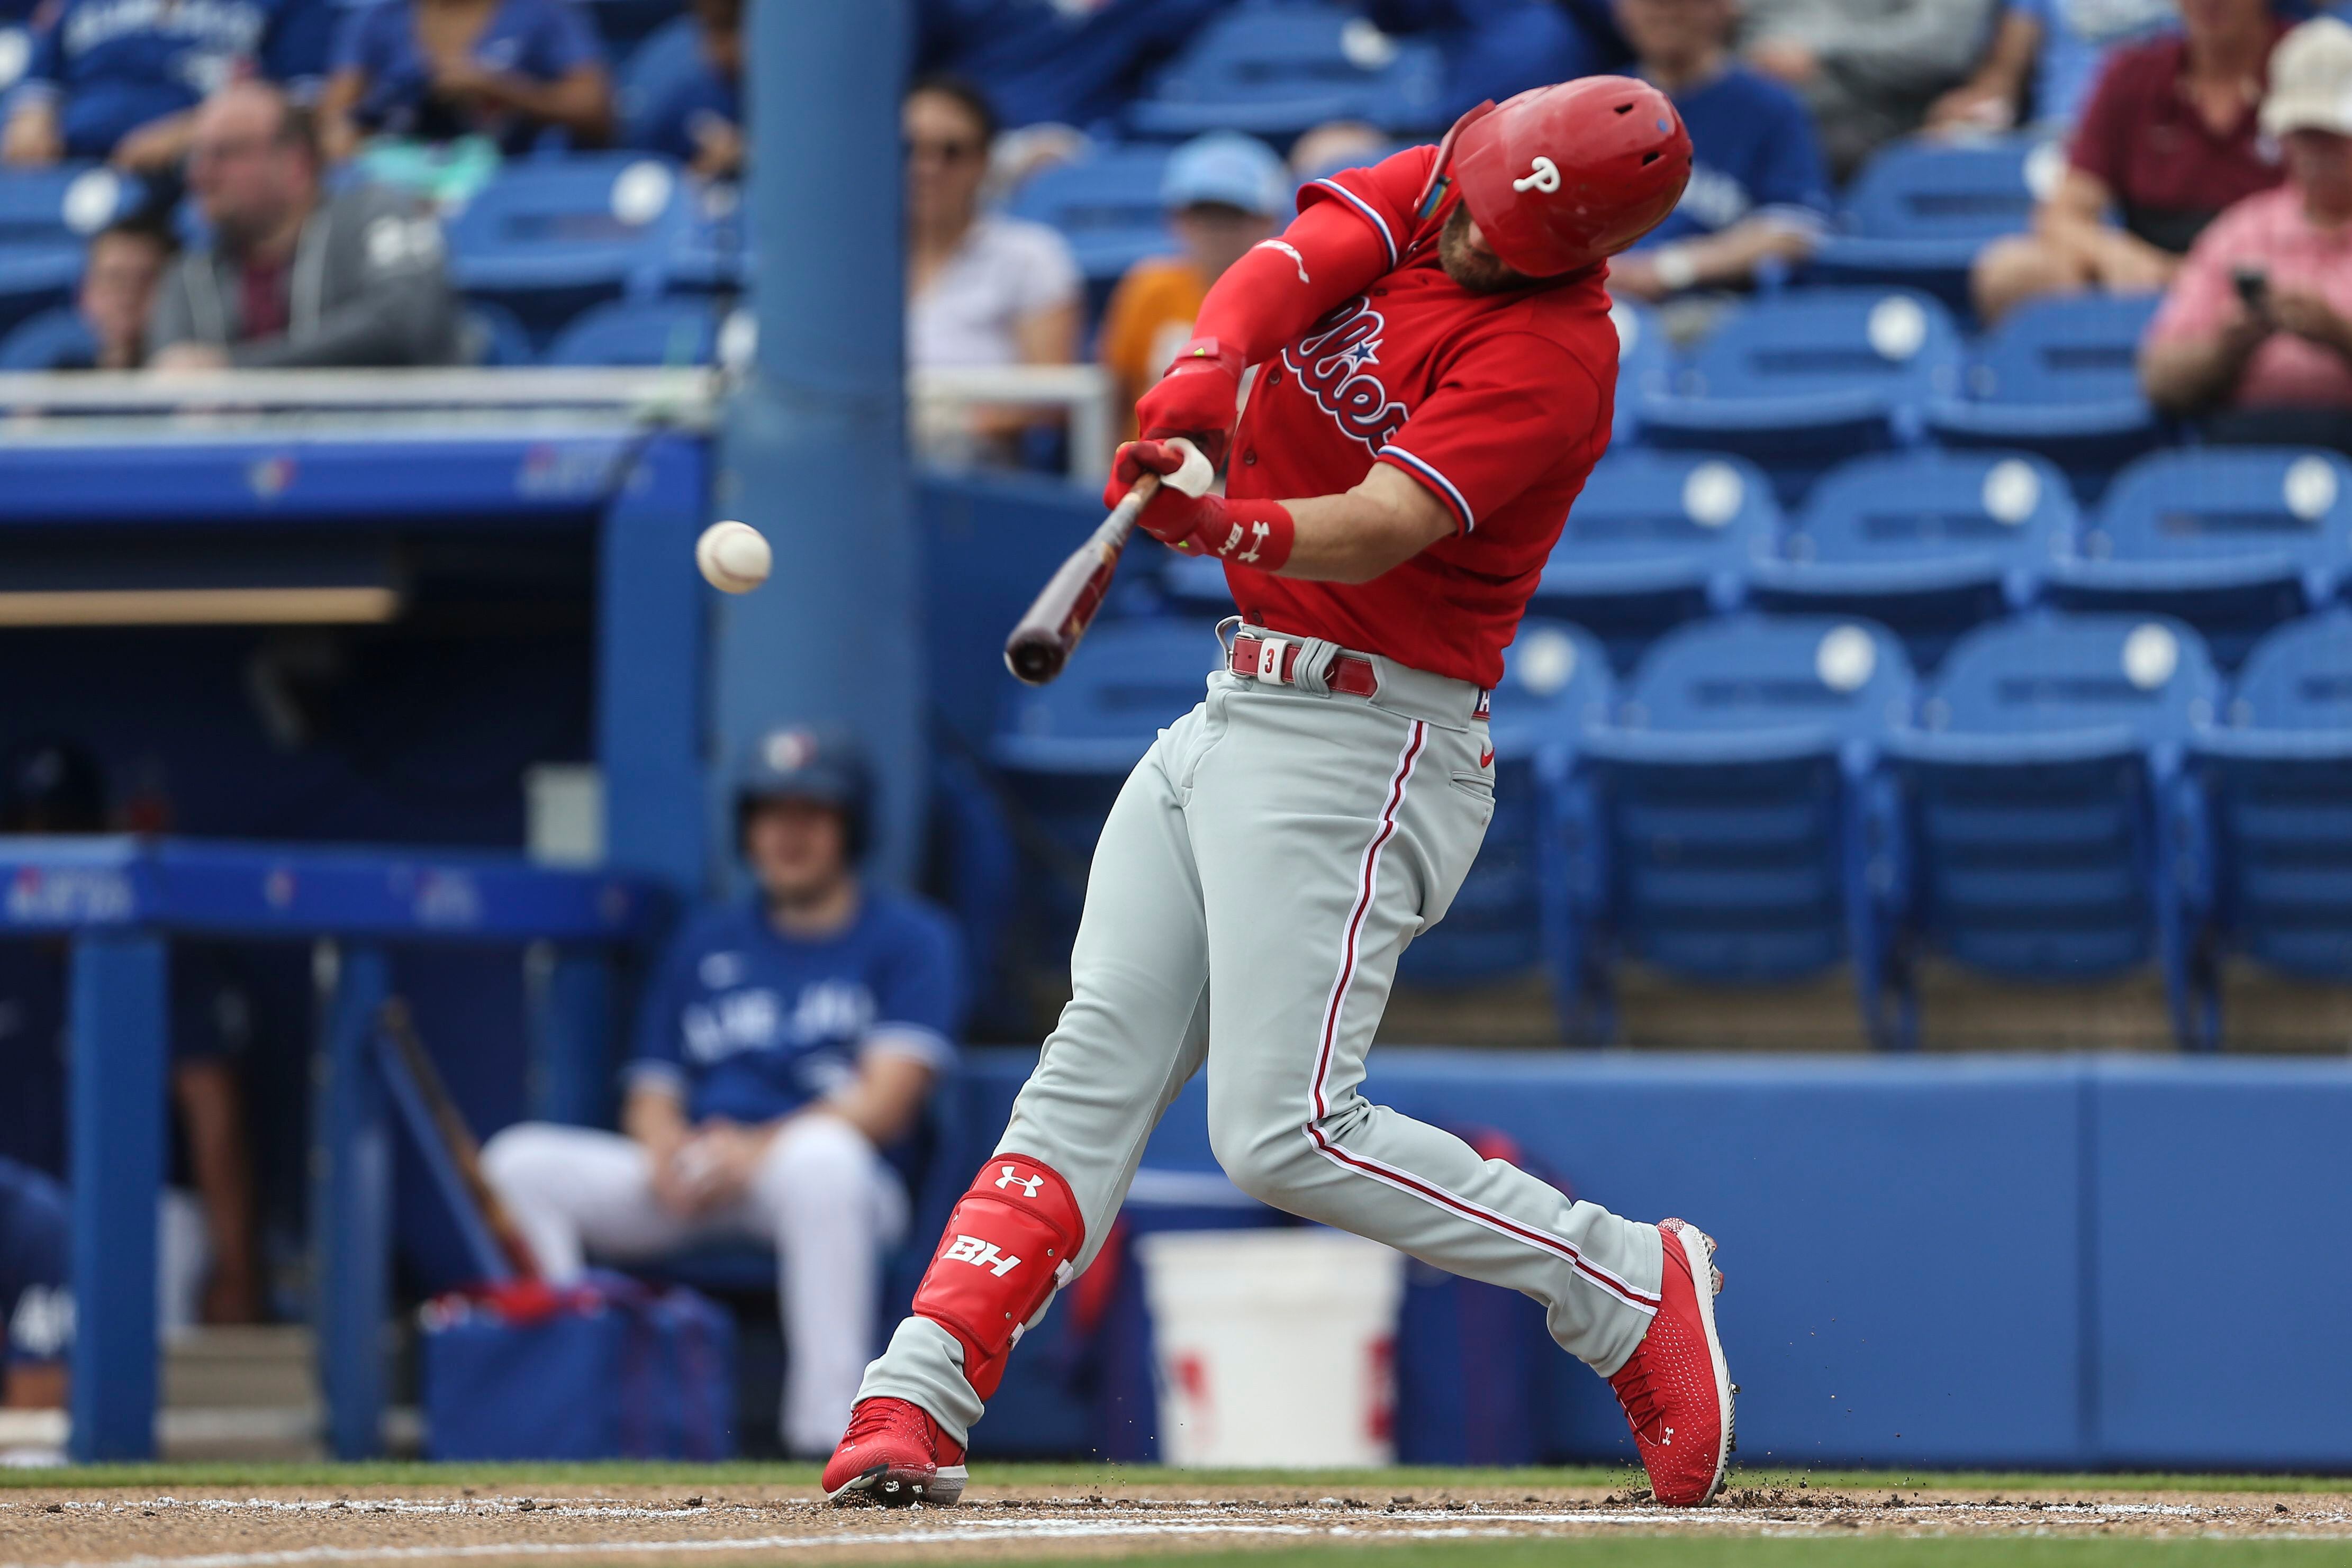 Photos of the Phillies-Blue Jays 2-2 tie in the 6th inning.